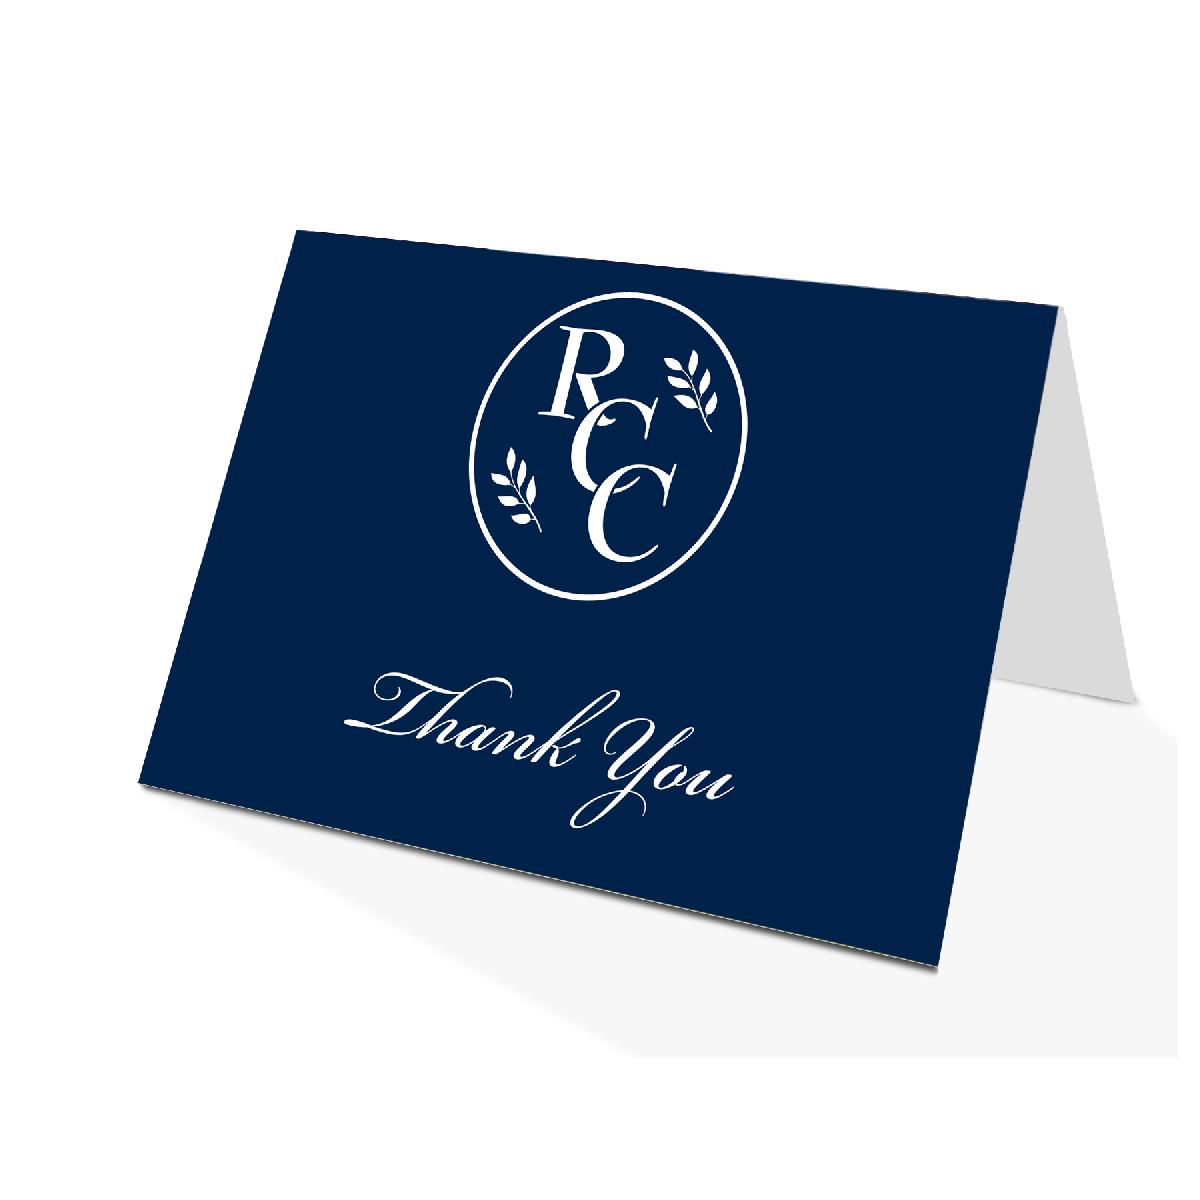 Announcement, Invitation, Thank You Cards - Glossy, 12pt Full Color Front & Back - Size 4" x 6" - Standard